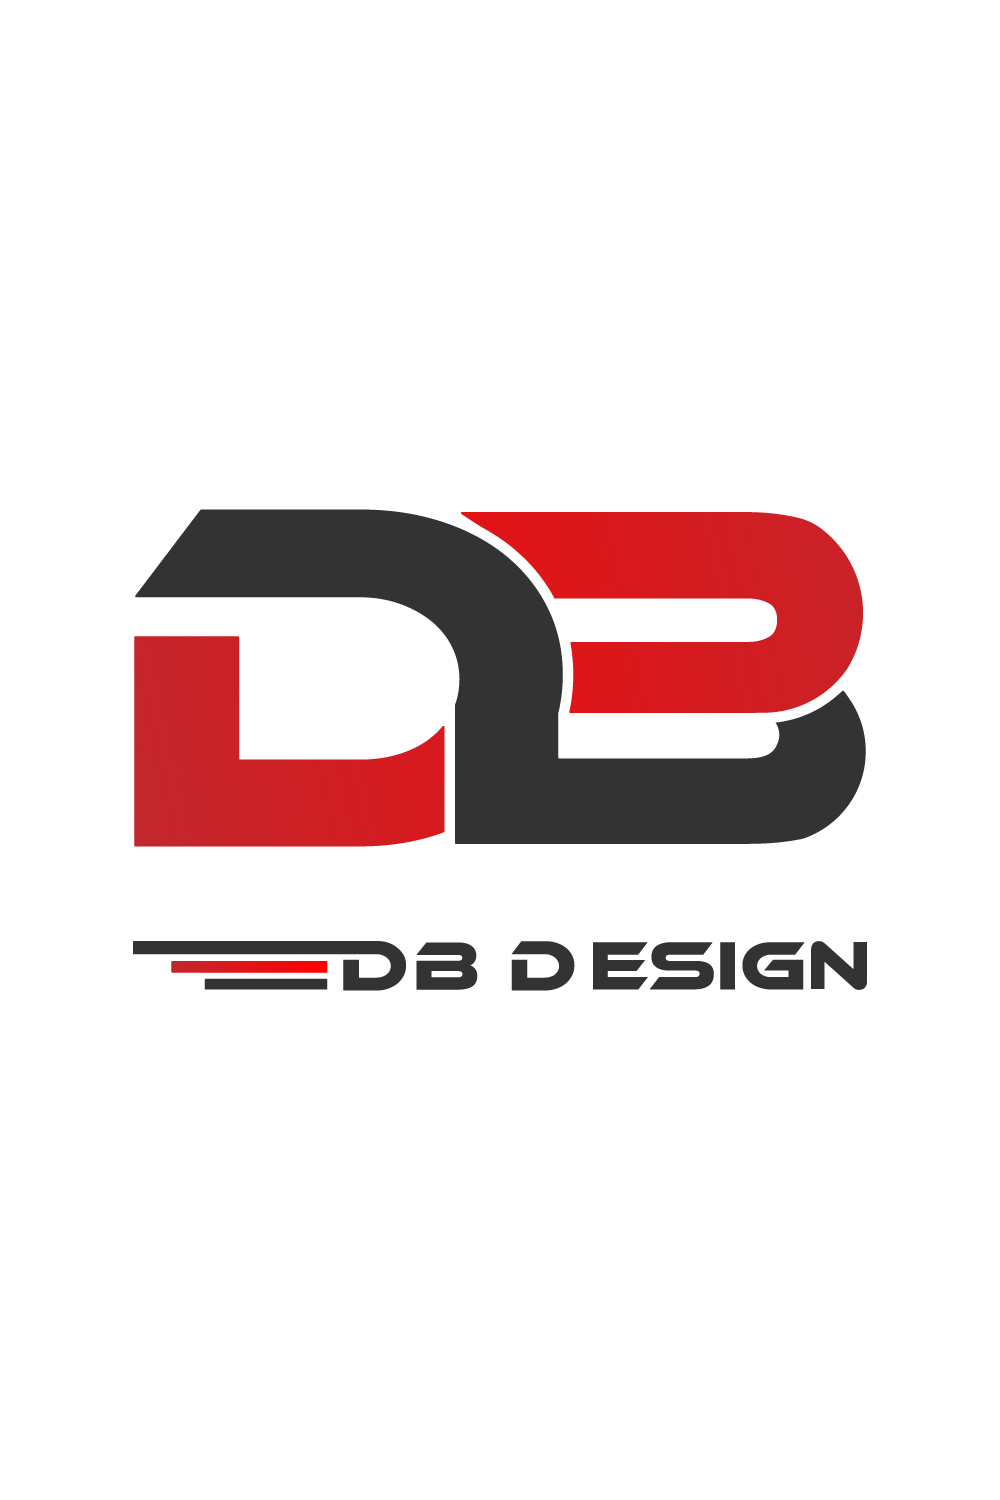 DB letters logo design vector images DB logo red and black color monogram design BD icon template company royalty premium download pinterest preview image.